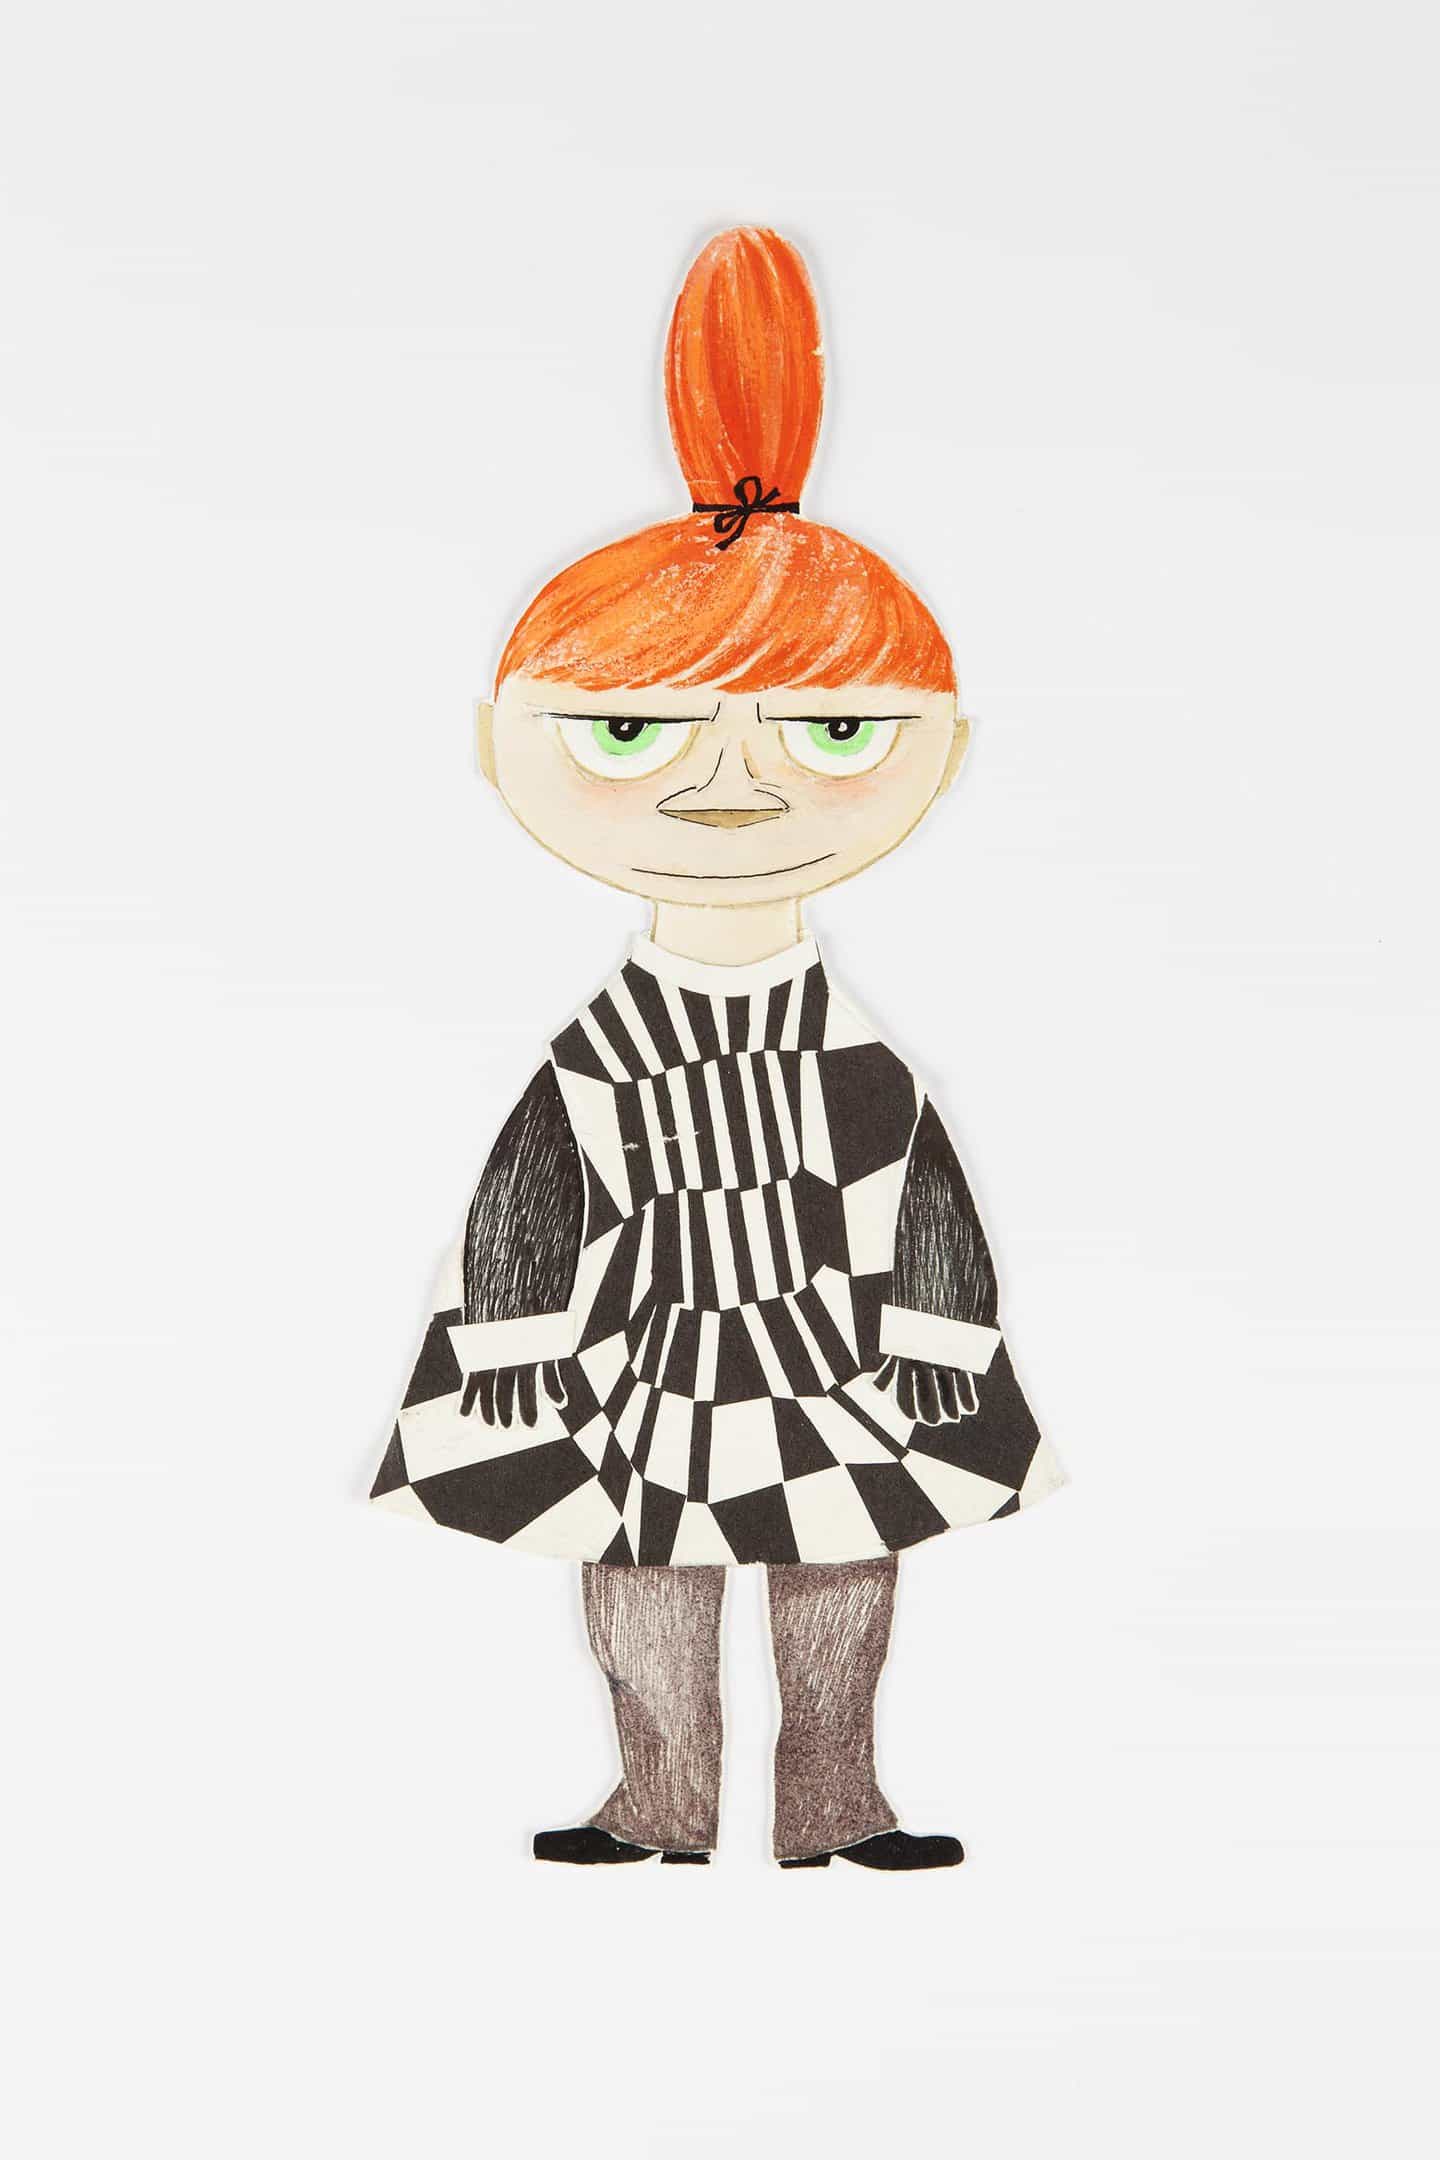 Tove Jansson: Little My Paperdoll (Copyright © Moomin Characters)